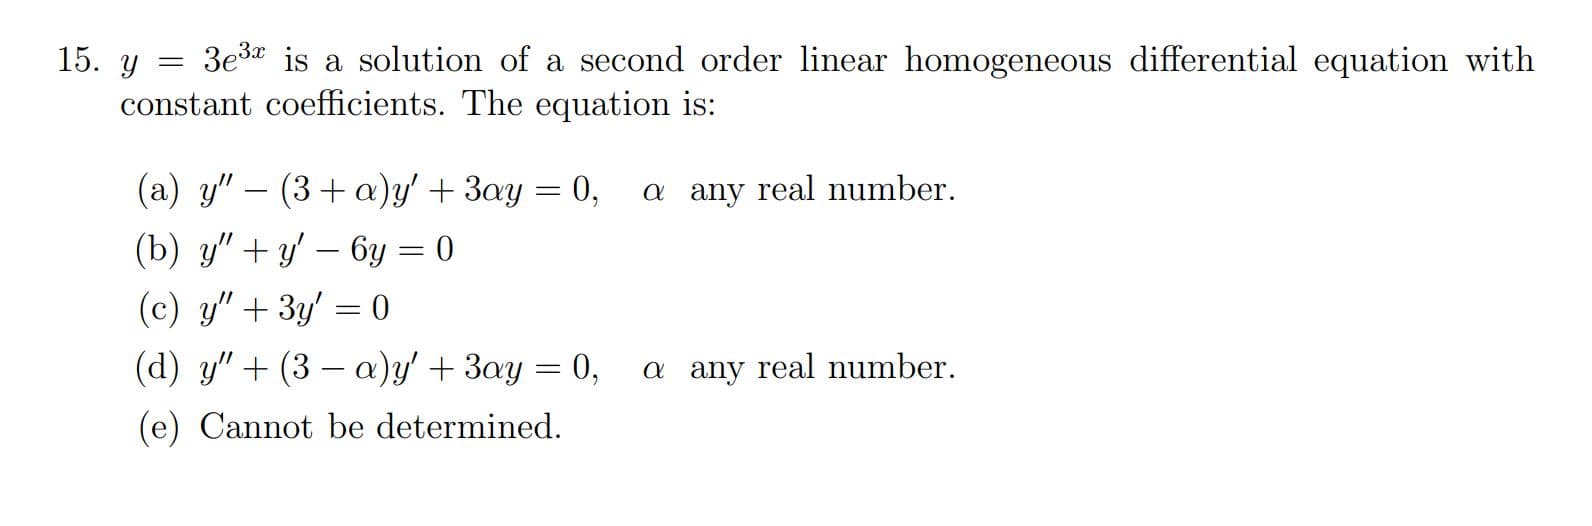 3e3* is a solution of a second order linear homogeneous differential equation with
constant coefficients. The equation is:
(a) y"
(3+a)y' + 3ay = 0,
a any real number.
(b) y" + y' – 6y = 0
(c) y" + 3y' = 0
%3D
(d) y" + (3 – a)y' + 3ay = 0,
a any real number.
(e) Cannot be determined.
